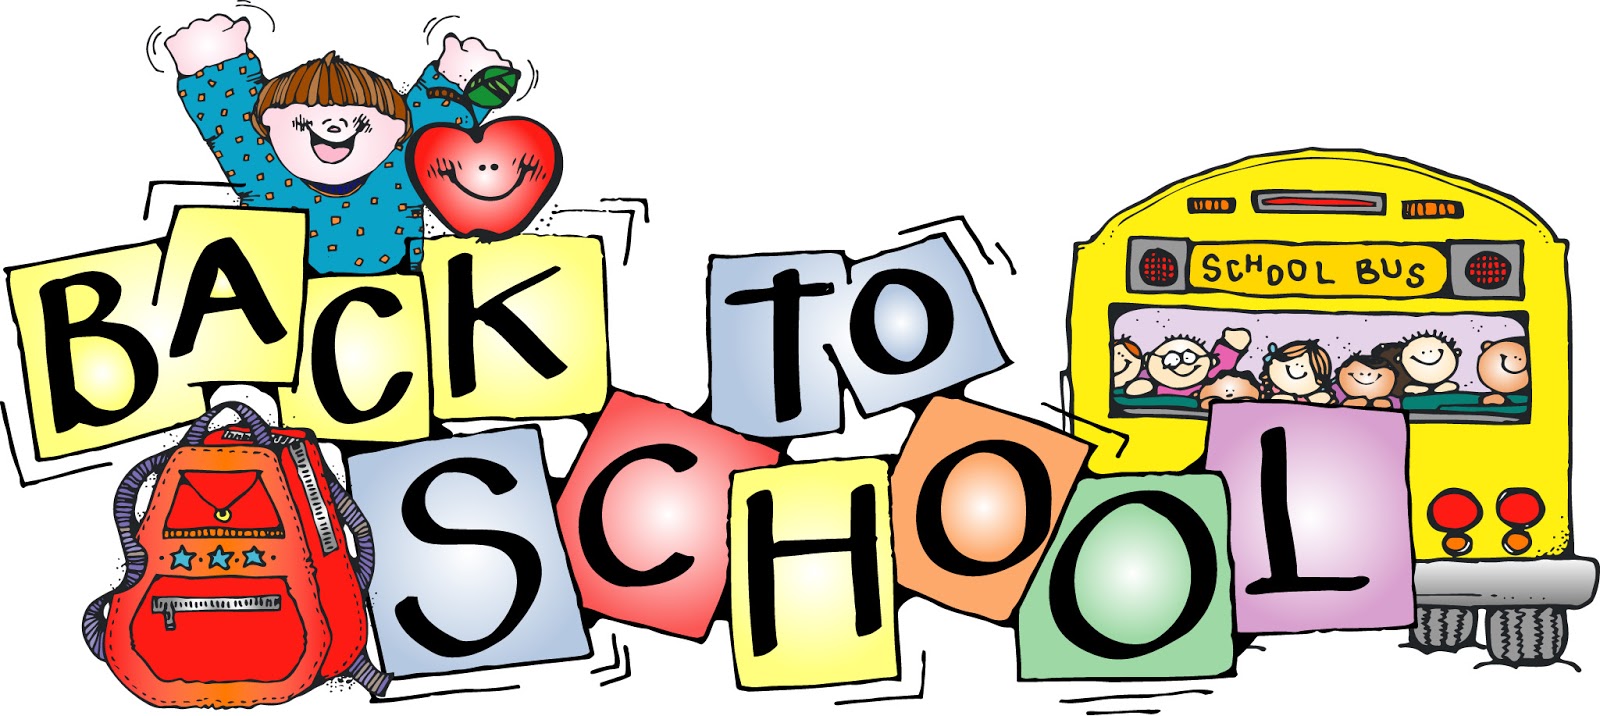 back to school images clip art - photo #39